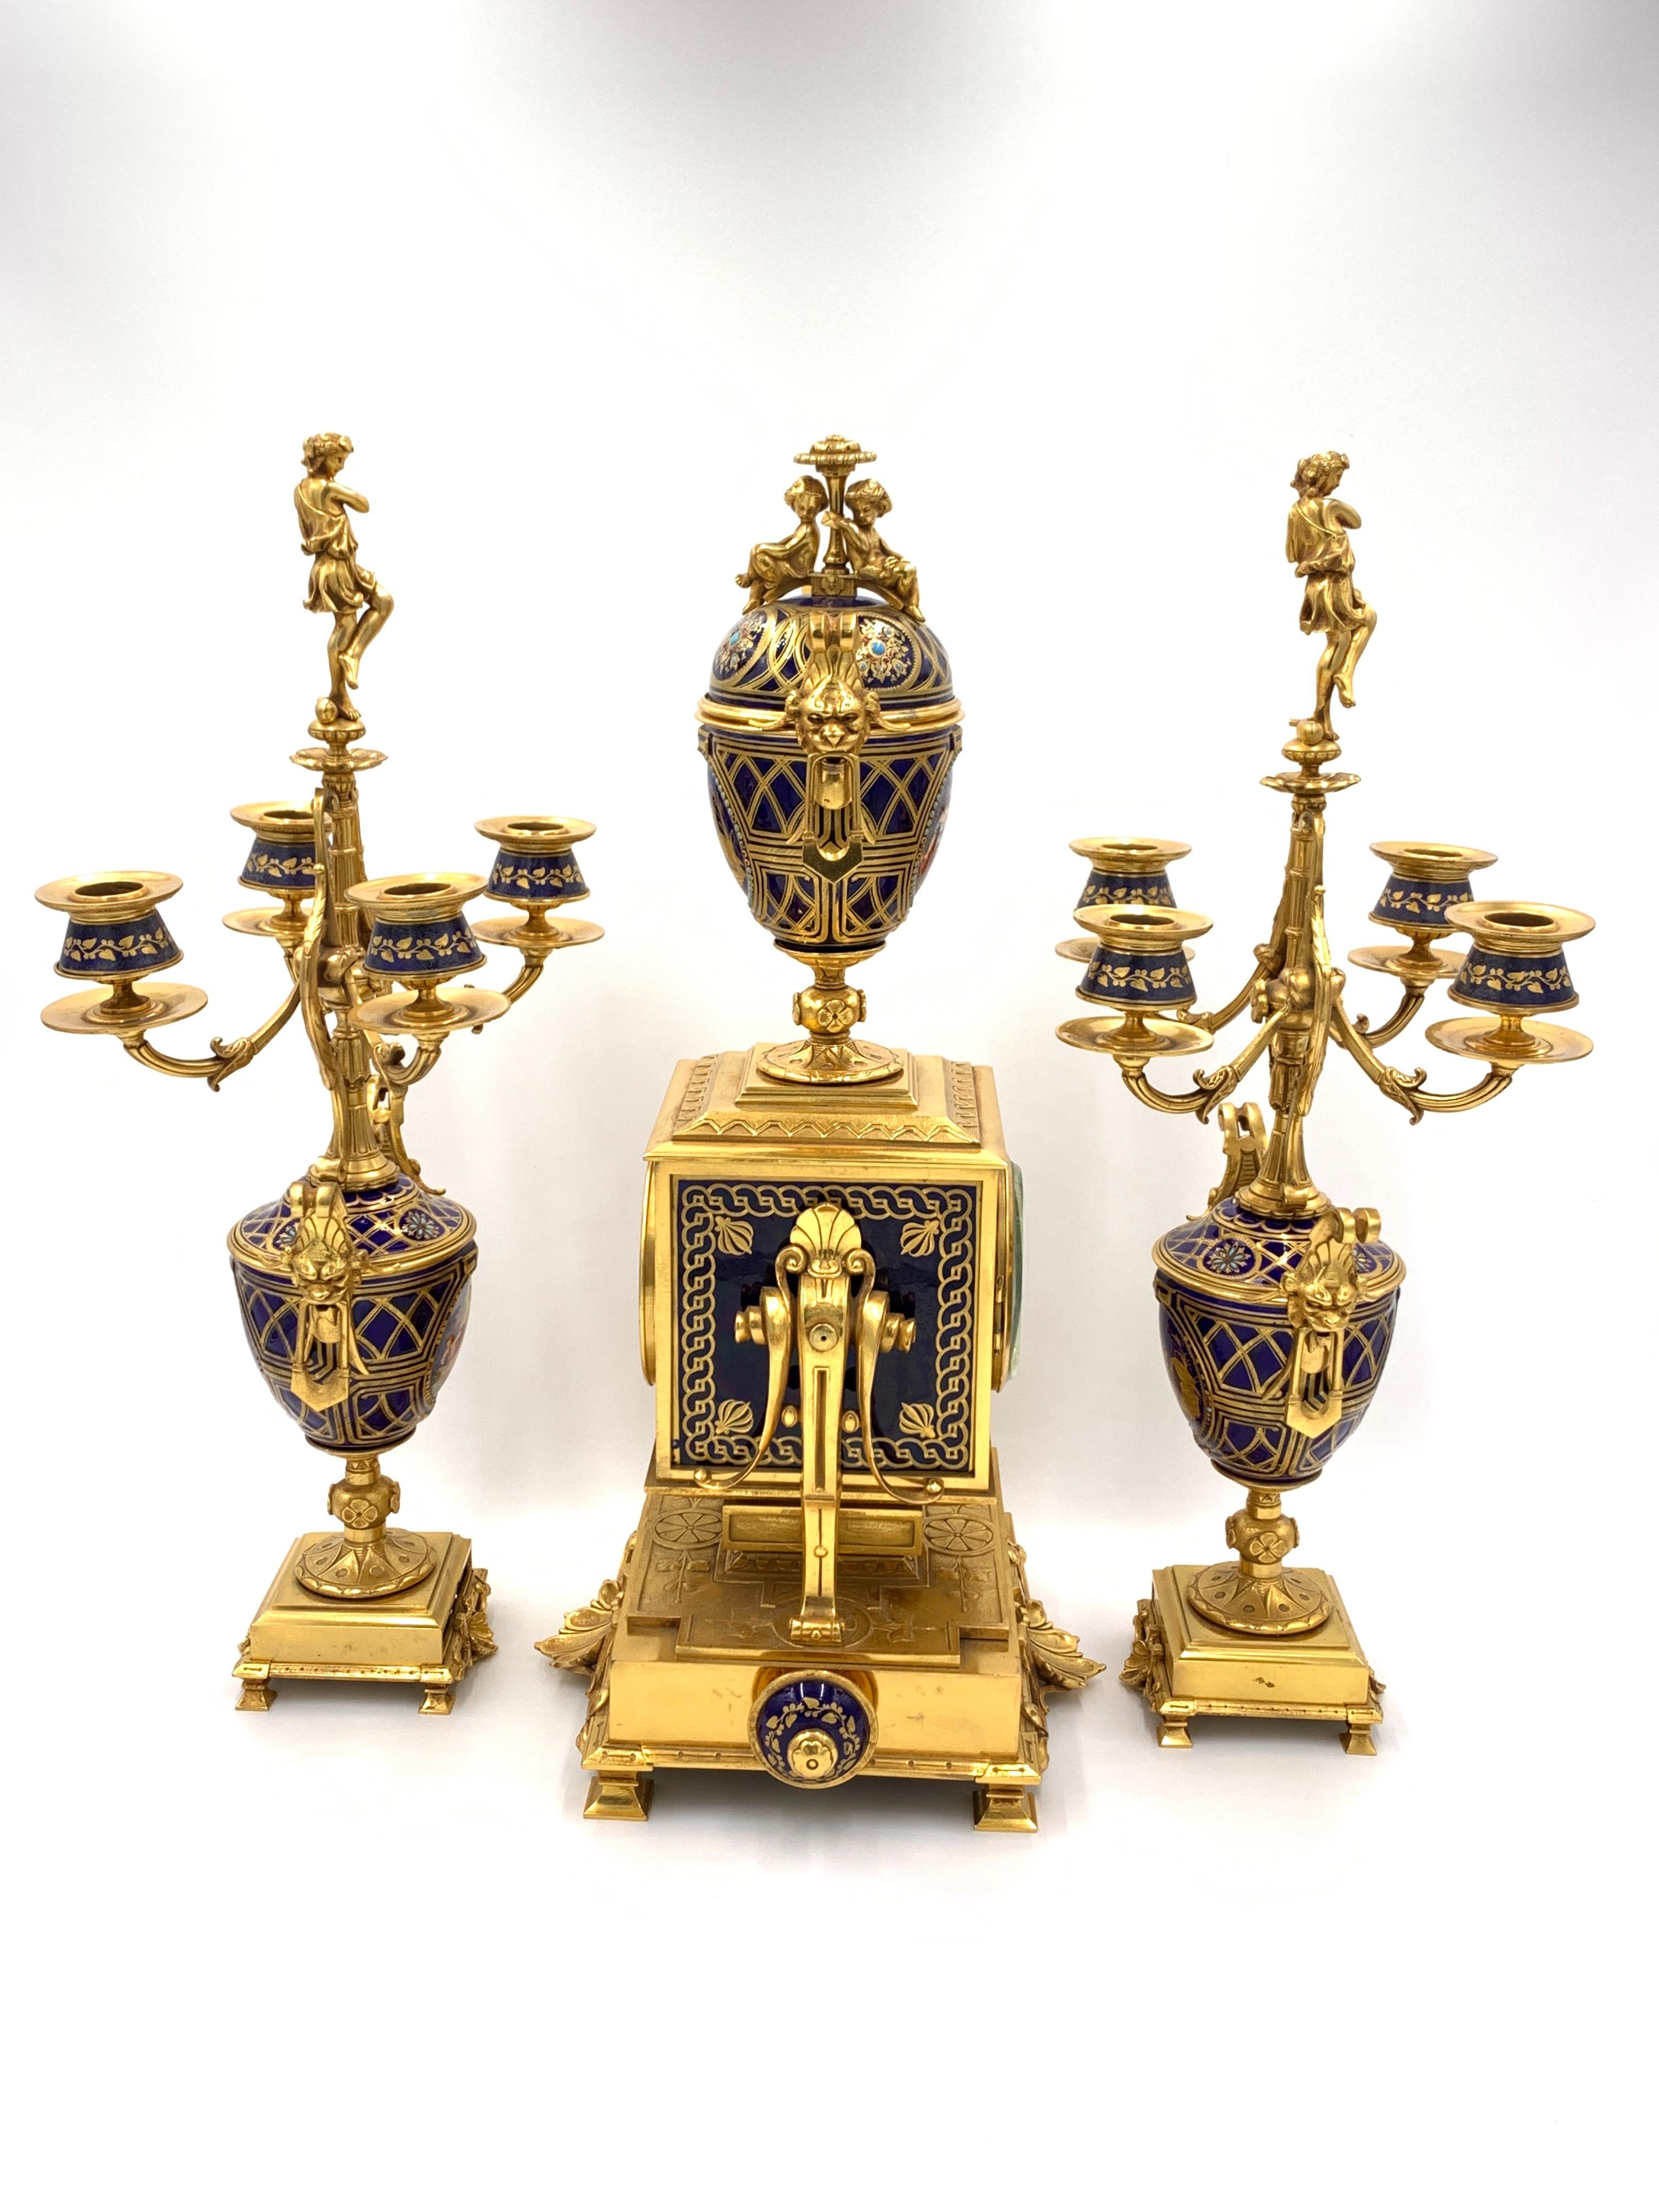 A fine quality 19th century French Sevres porcelain style and gilded ormolu clock garniture, impressive pair of four branch candelabra. 

Measures: Clock, H: 53cm, D: 24cm, W: 27cm
Candelabra, H: 50.5cm, D: 16, W: 20cm.